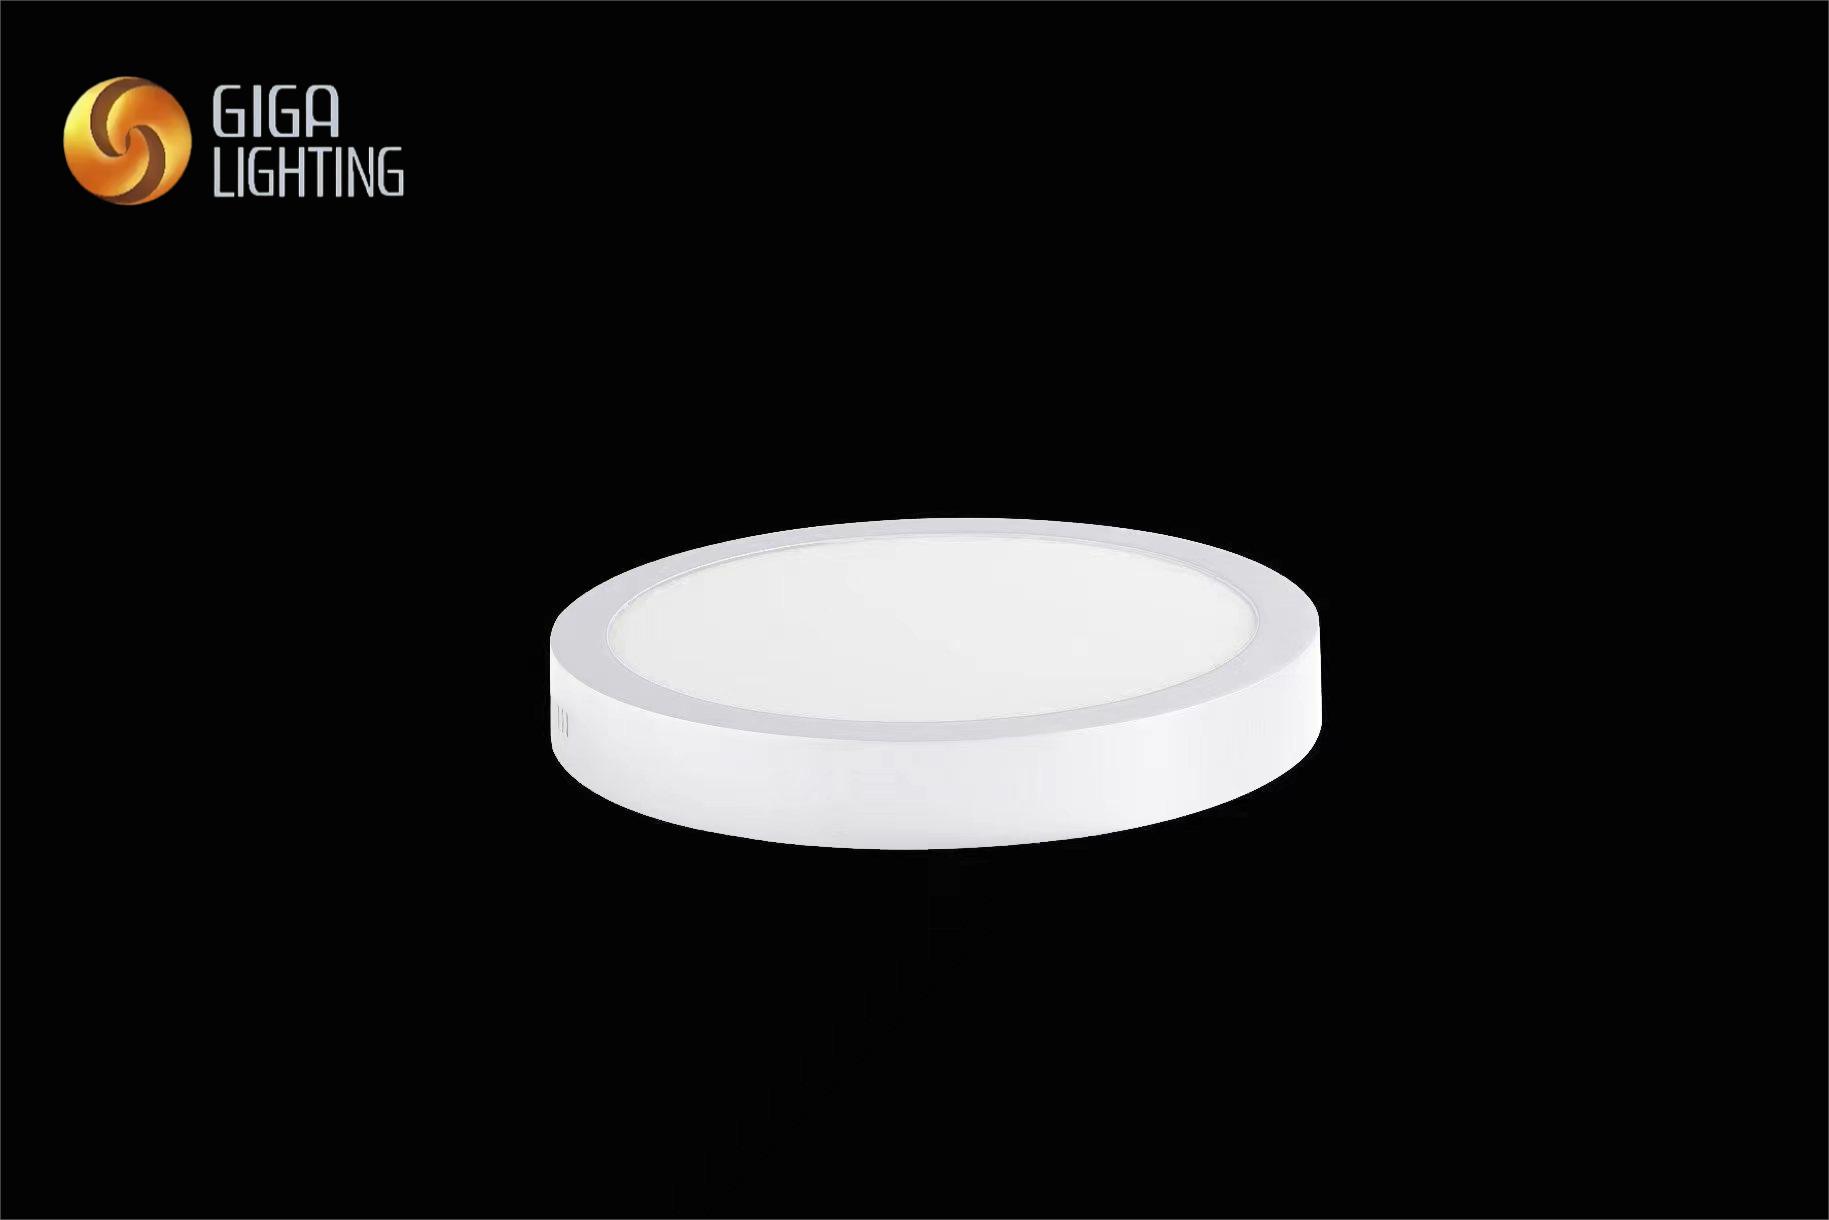 Surface panel light Bathroom Lights,24W IP40 Round Ceiling Lights Equivalent,Ultra-thin,Small,Dome,Waterproof Modern LED Flush Mount Ceiling Lamp for Bedroom,Kitchen,Toilet,Utility Room